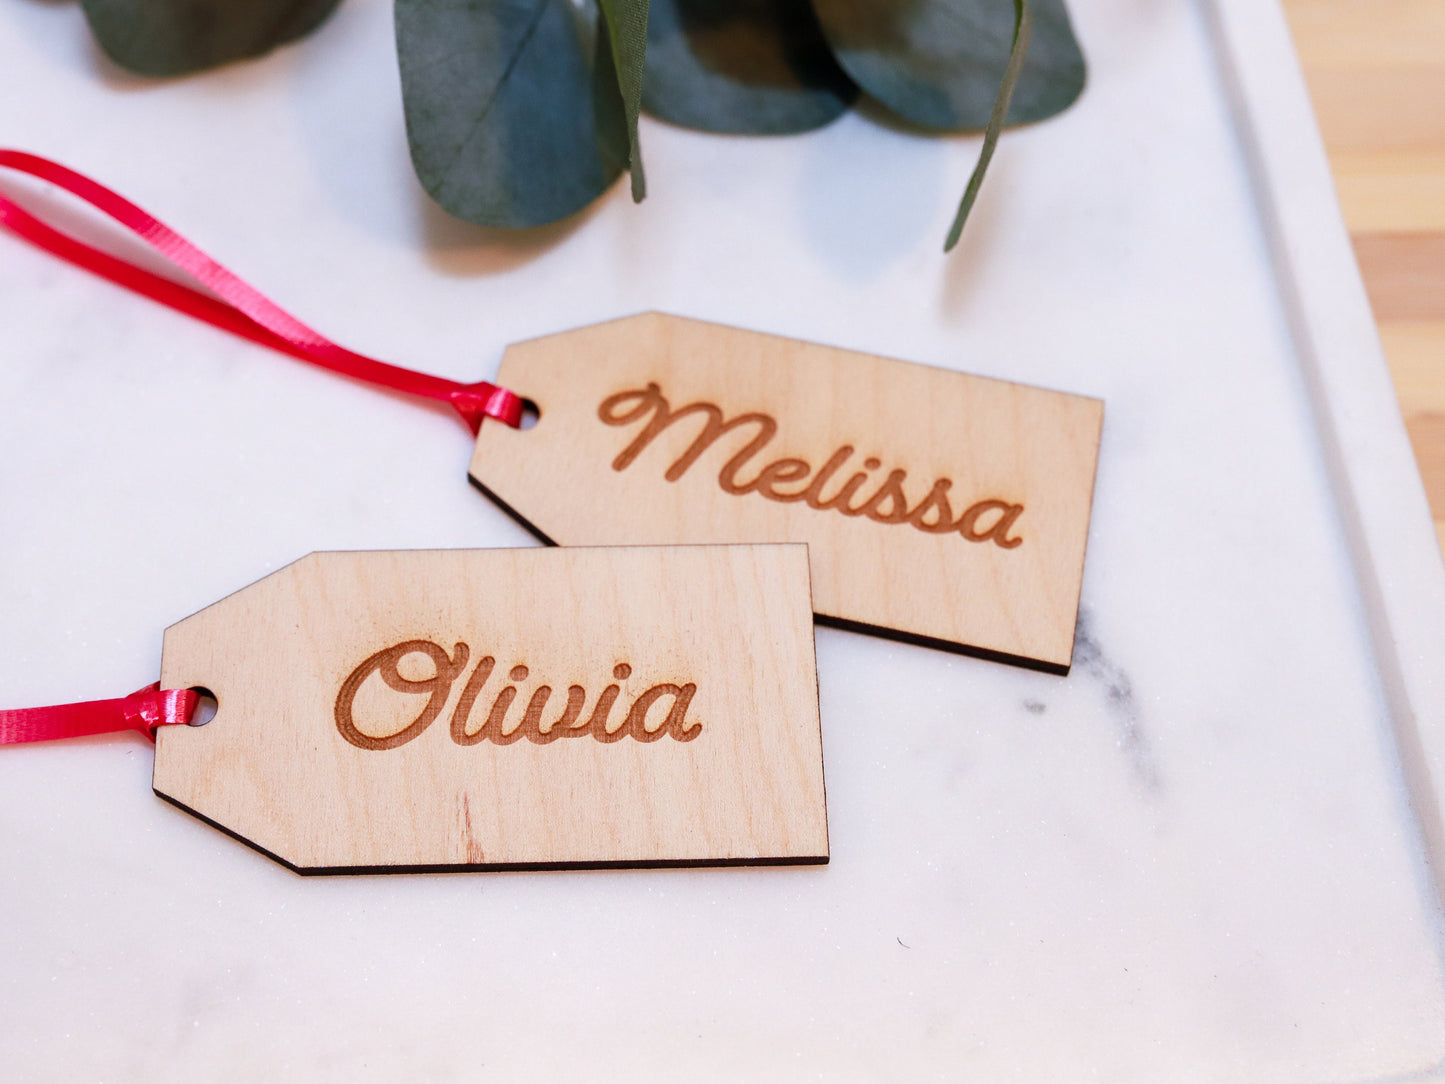 Wood Christmas Gift Tag Personalized with Name - Rustic Christmas Ornament Bauble - Custom Stocking Tag - Wood Place Card